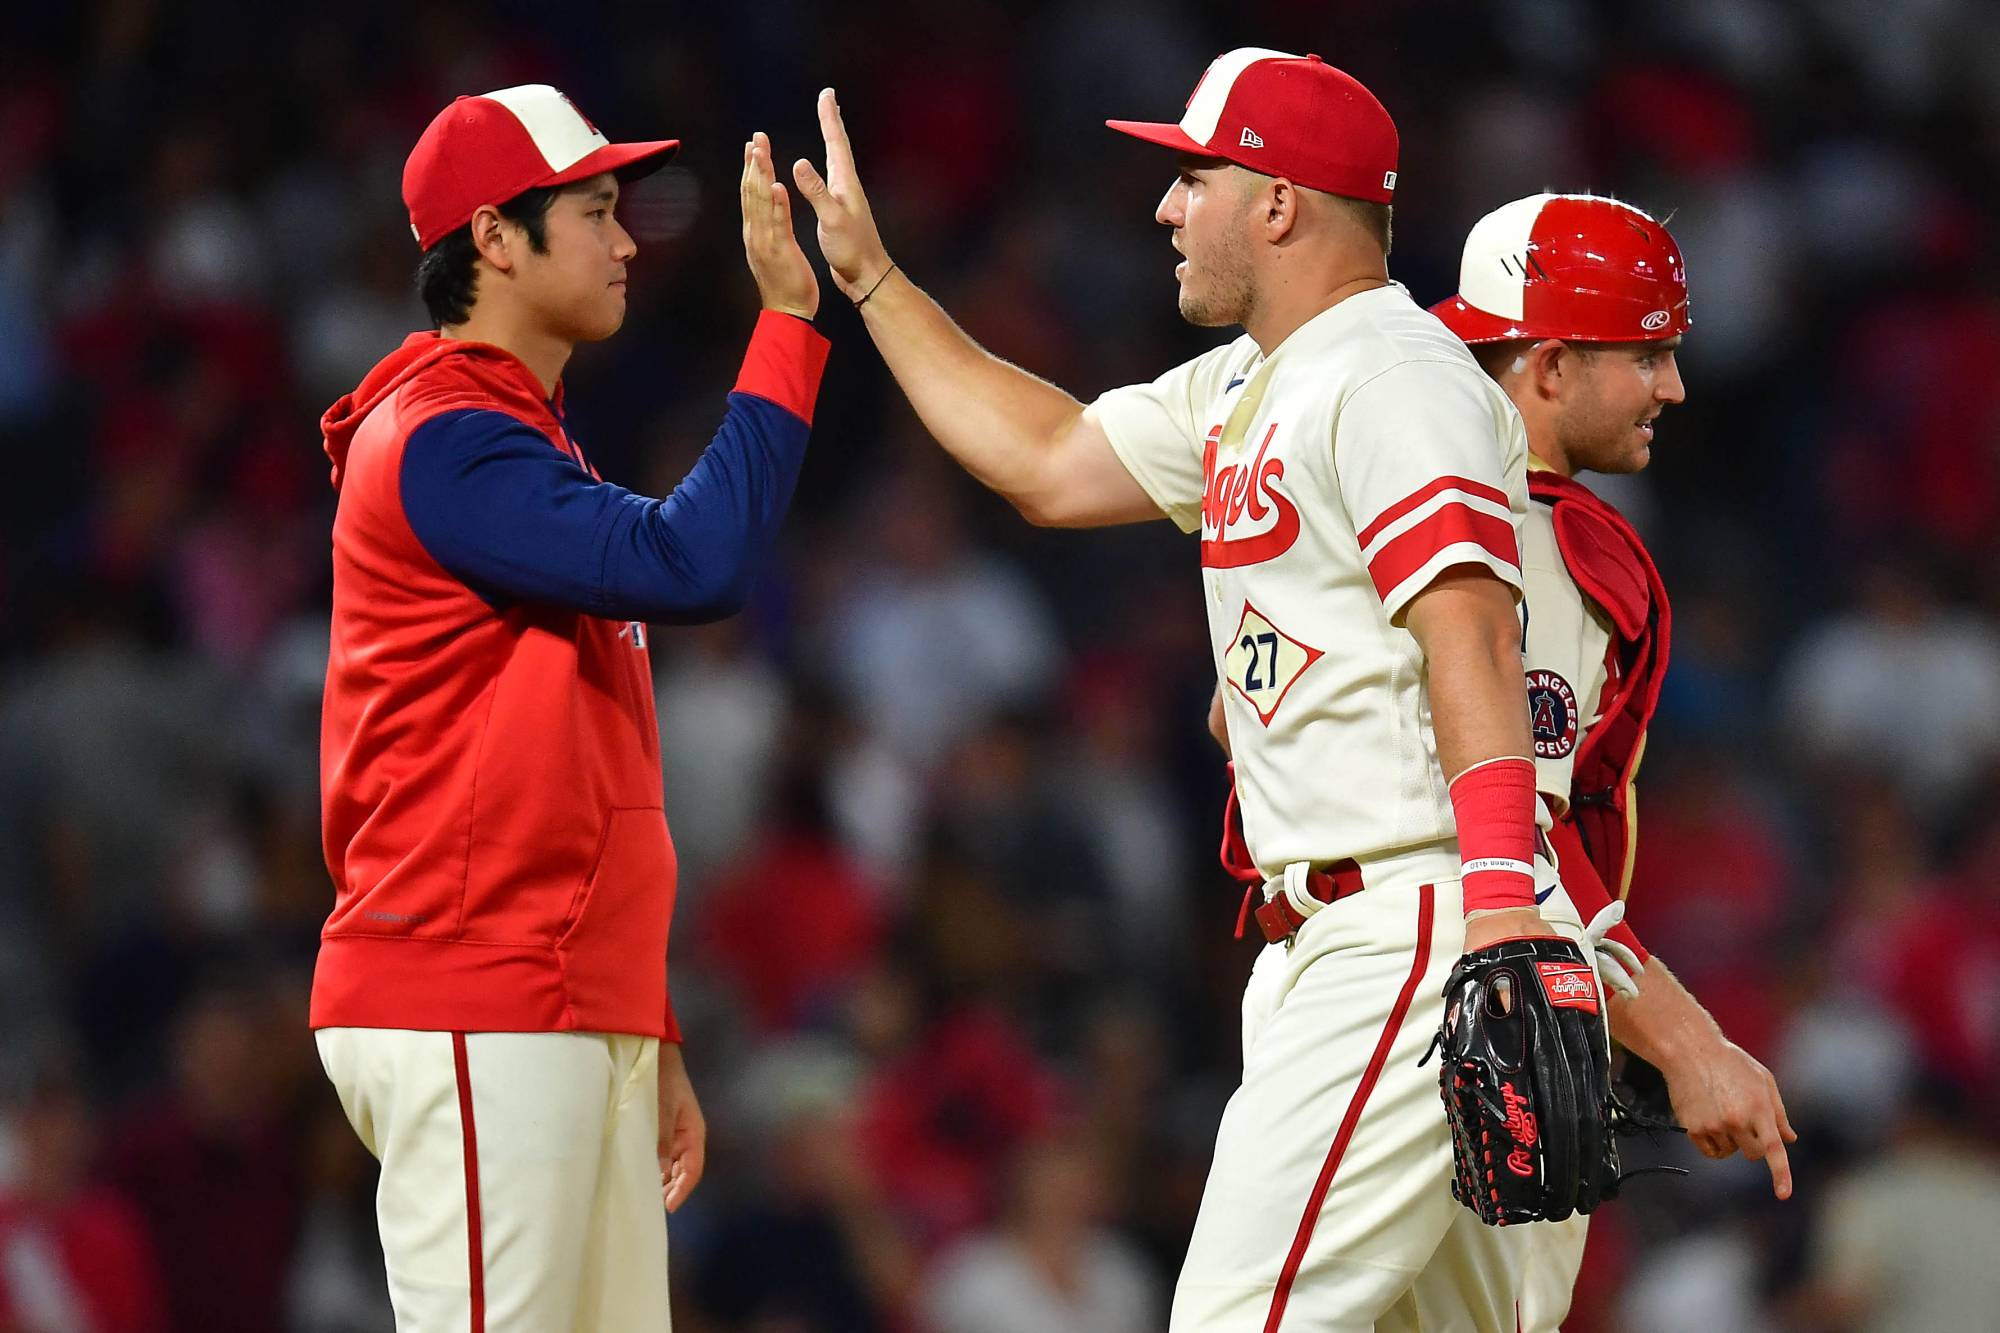 Japan edges USA in epic WBC final, capped by Ohtani striking out Trout